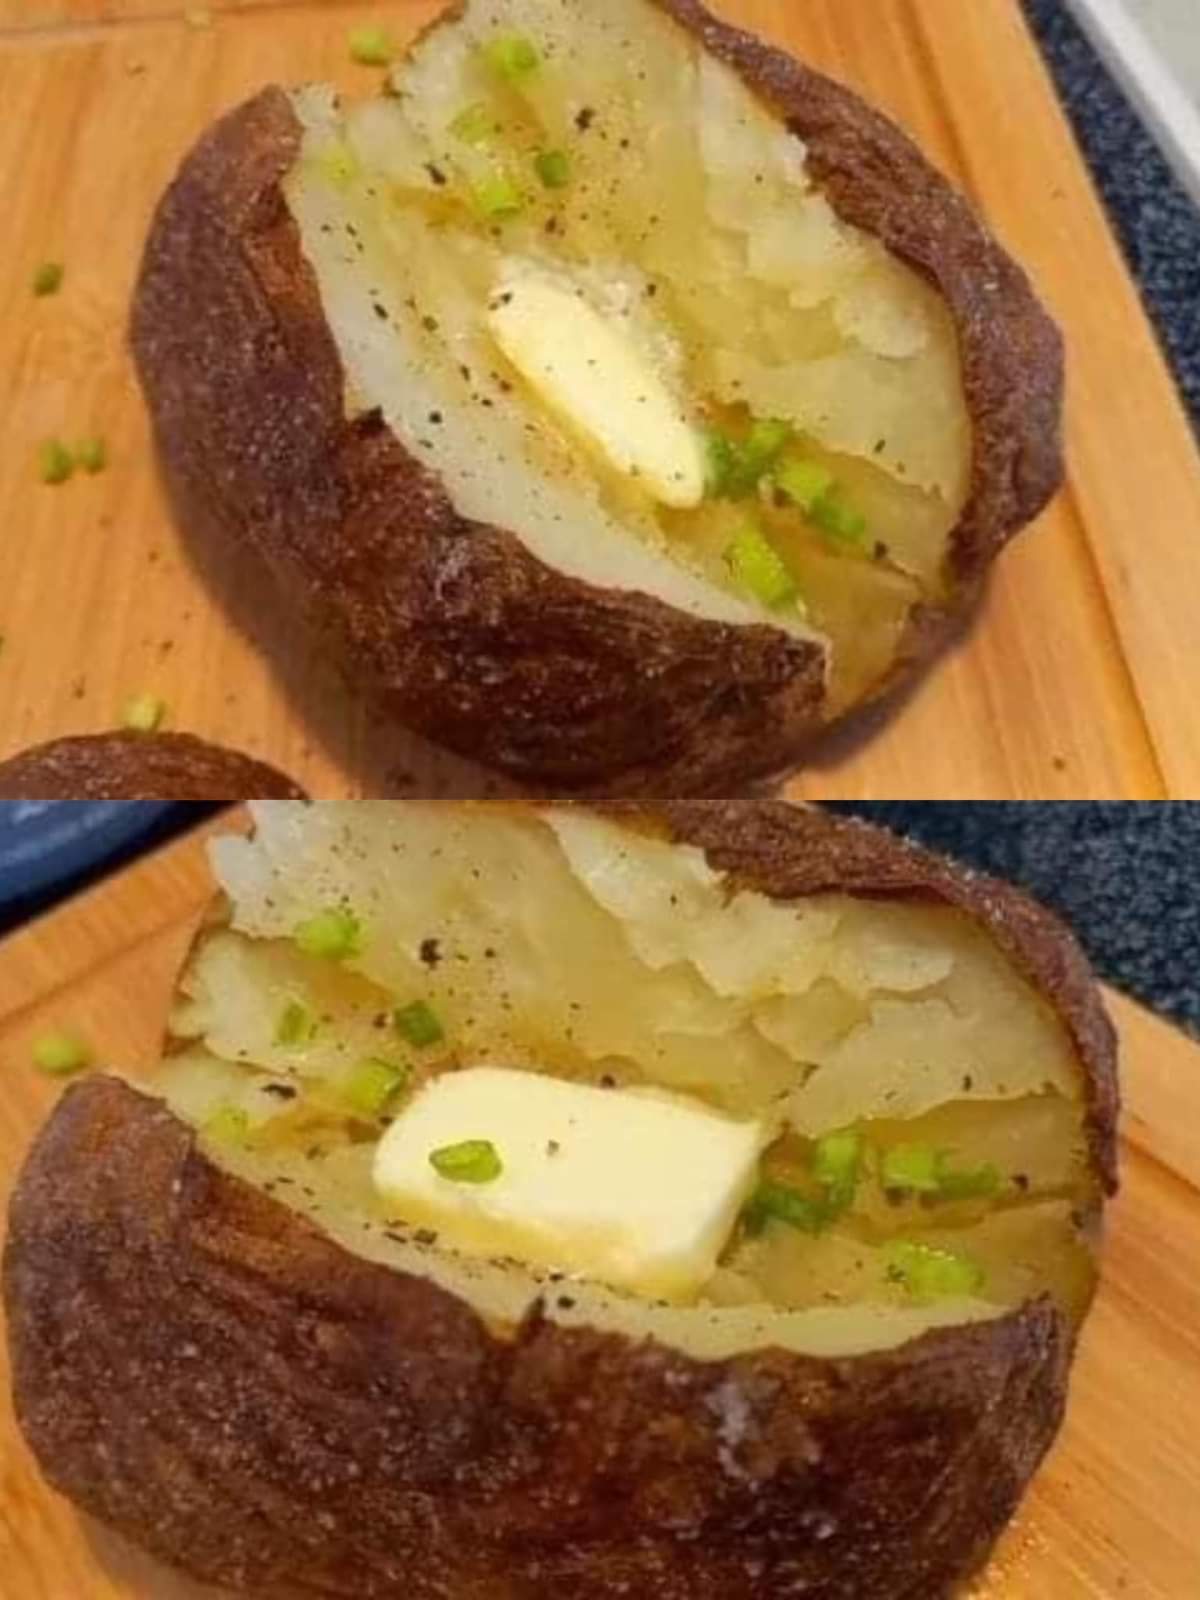 Hands down, the best way to eat potatoes! I love this one